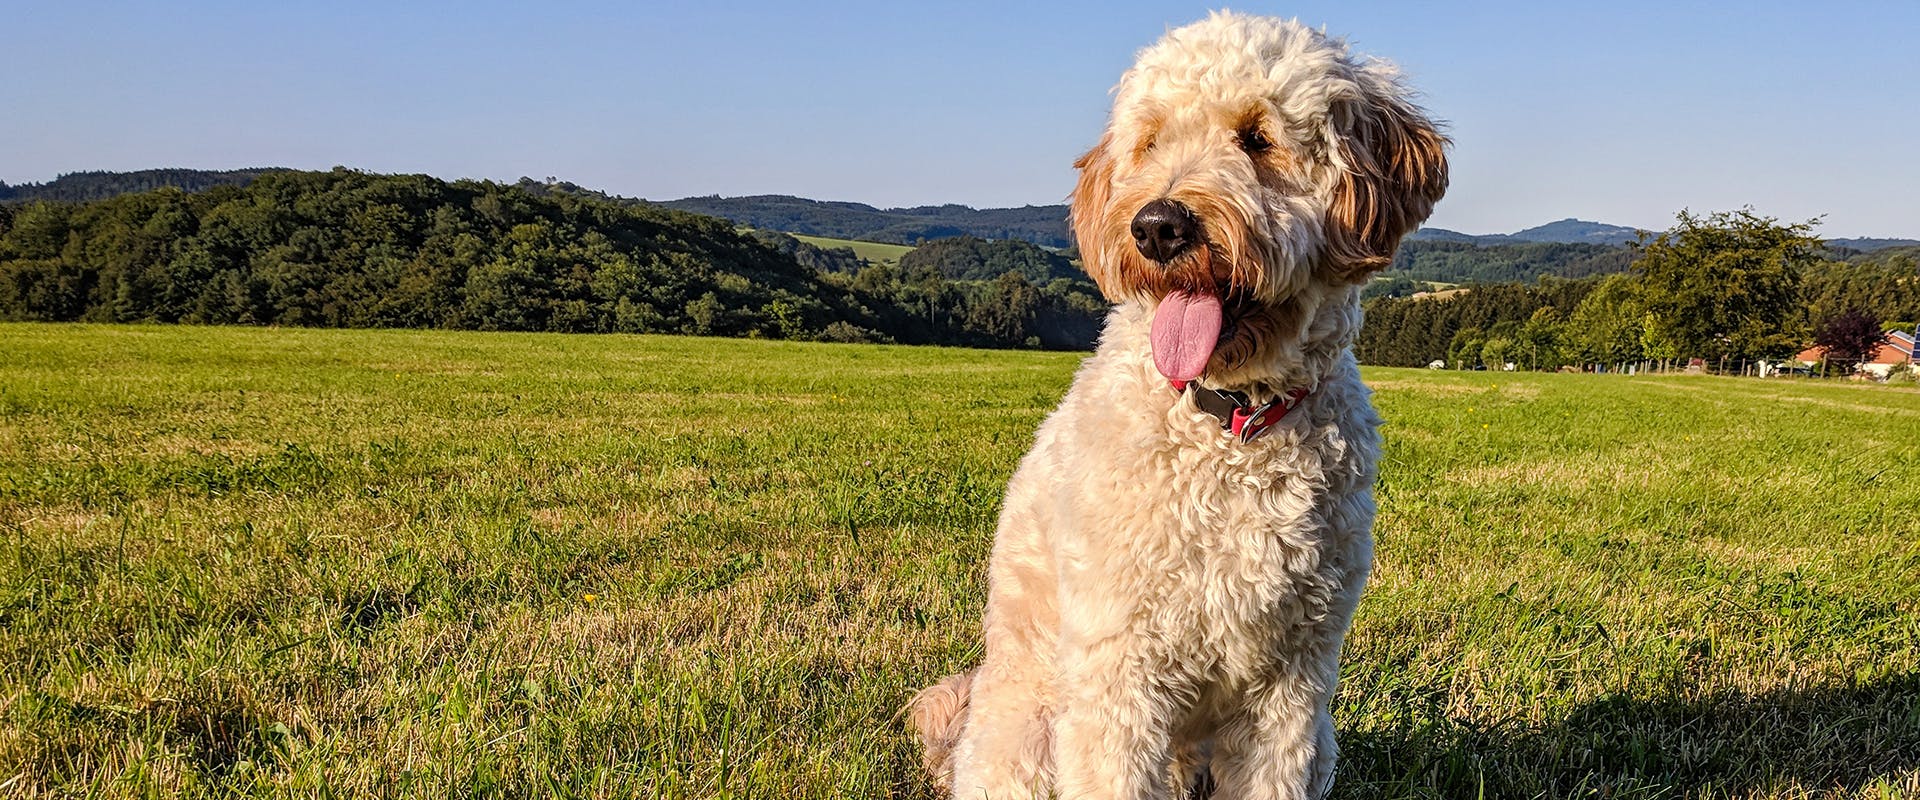 A Goldendoodle sitting in a field